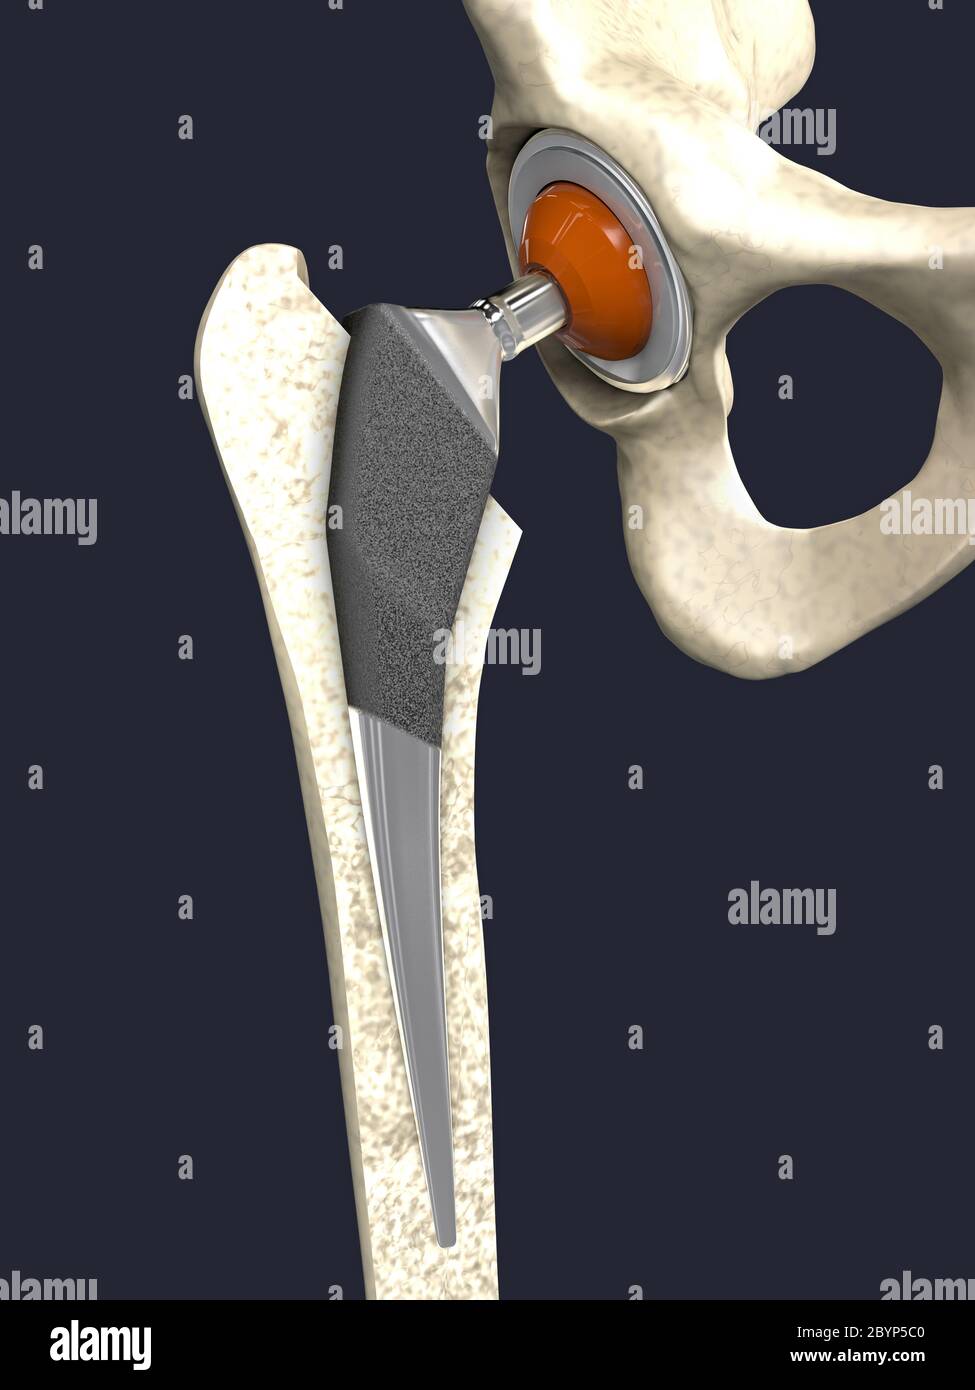 Function Of A Hip Joint Implant Or Hip Prosthesis In Frontal View 3d